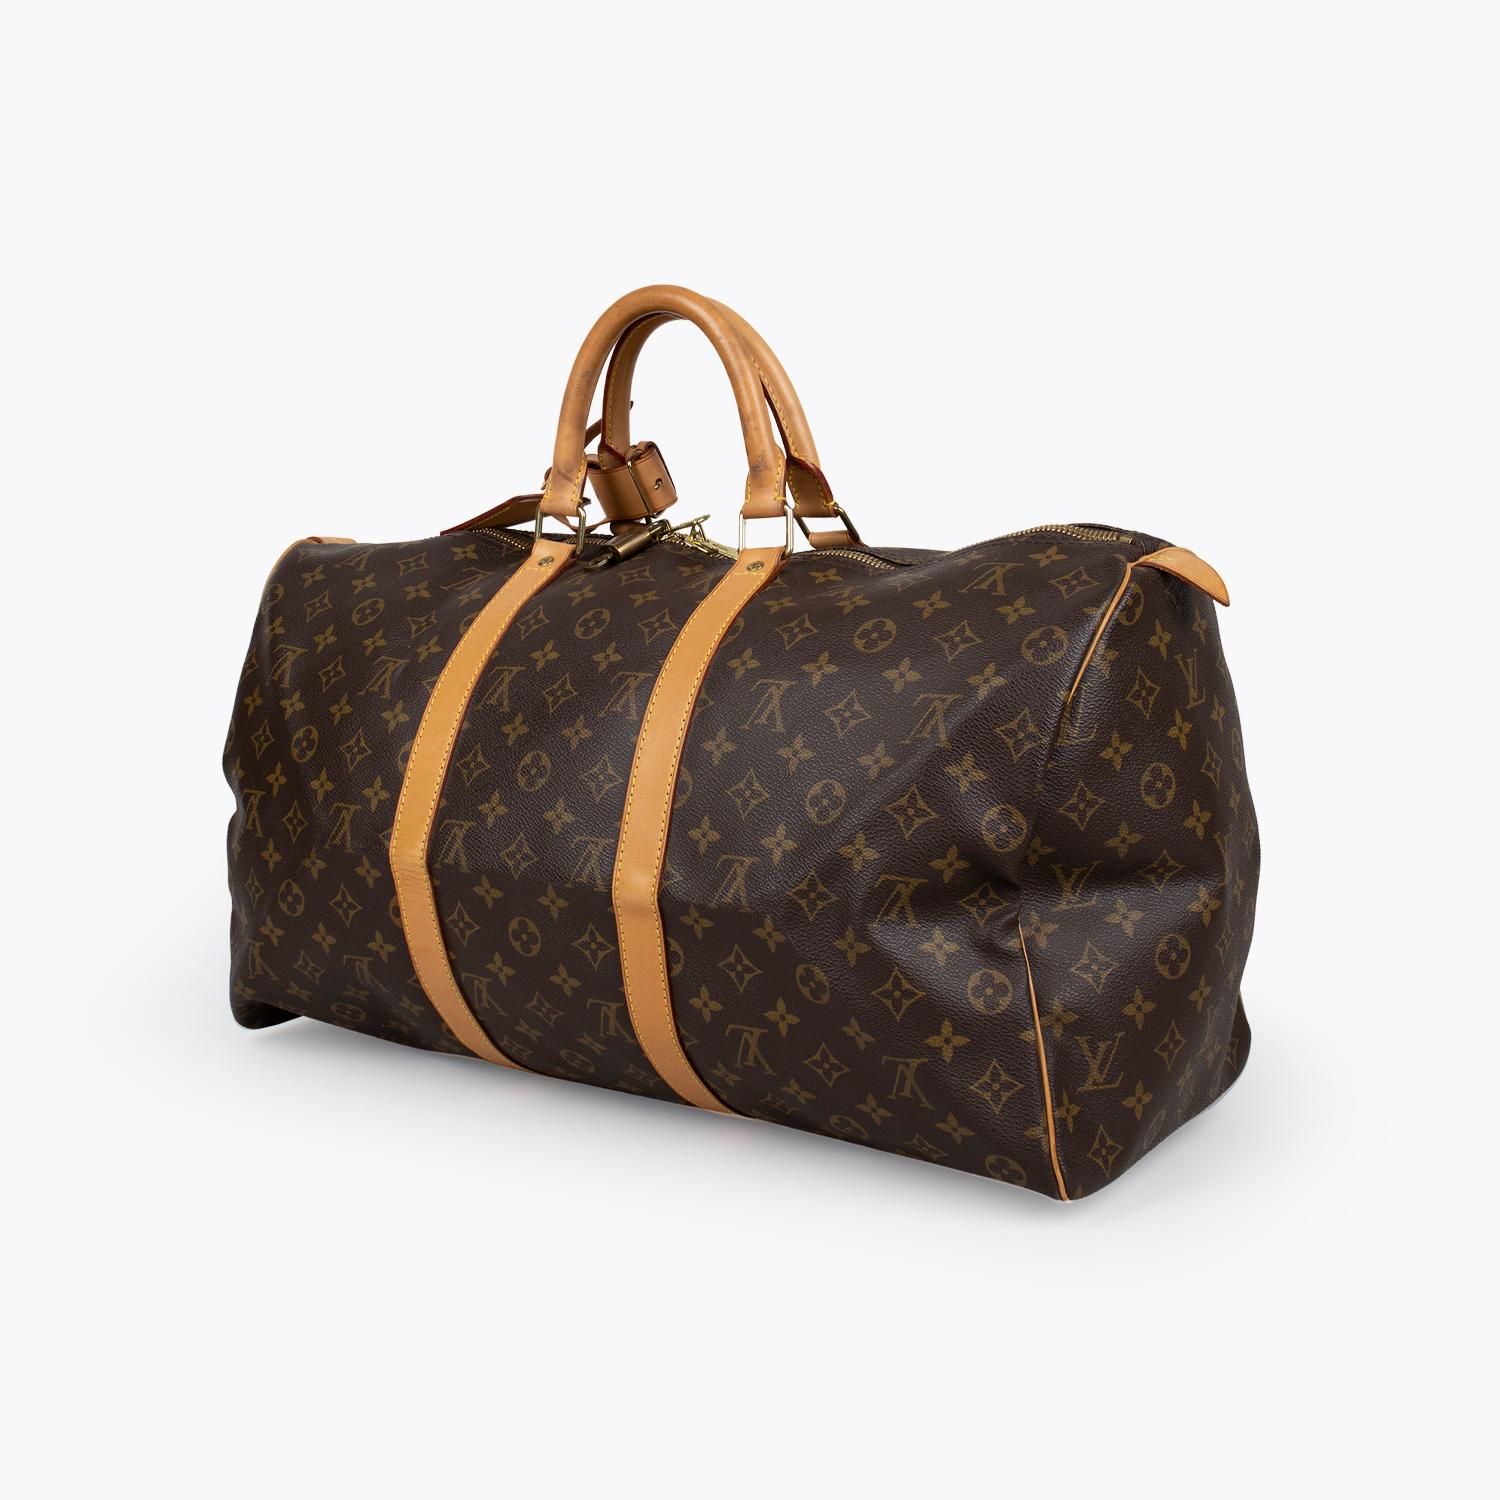 Brown and tan monogram coated canvas Louis Vuitton Keepall Monogram 50 with

- Brass hardware
- Tan vachetta leather trim
- Dual rolled top handles
- Tonal canvas lining and two-way zip closure at top

Overall Preloved Condition: Very Good
Exterior